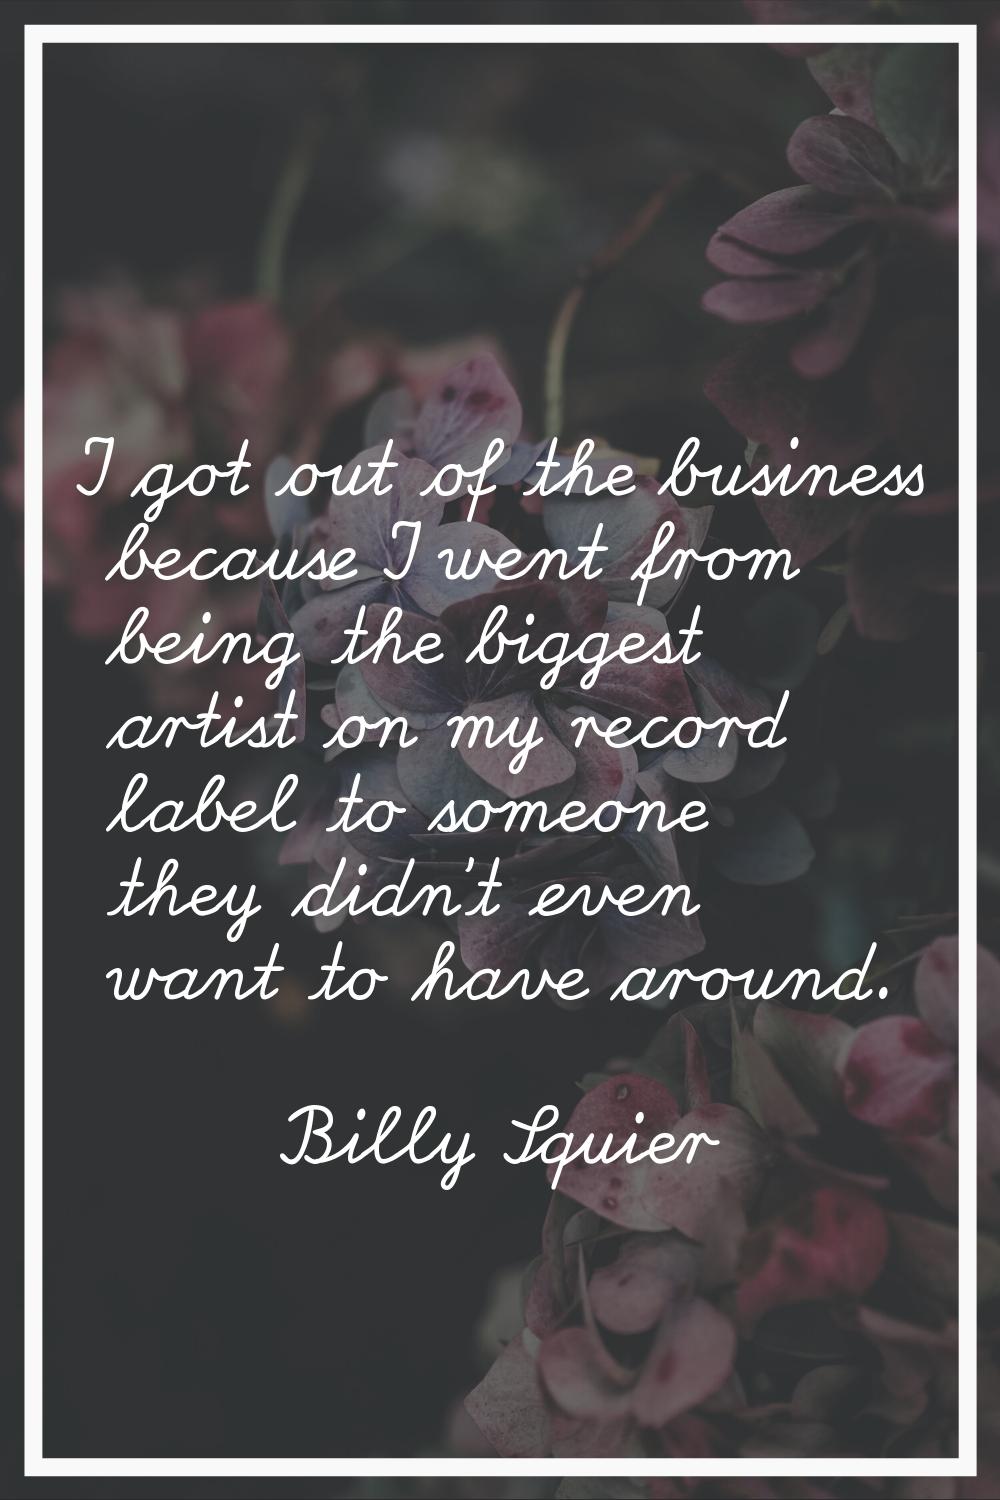 I got out of the business because I went from being the biggest artist on my record label to someon